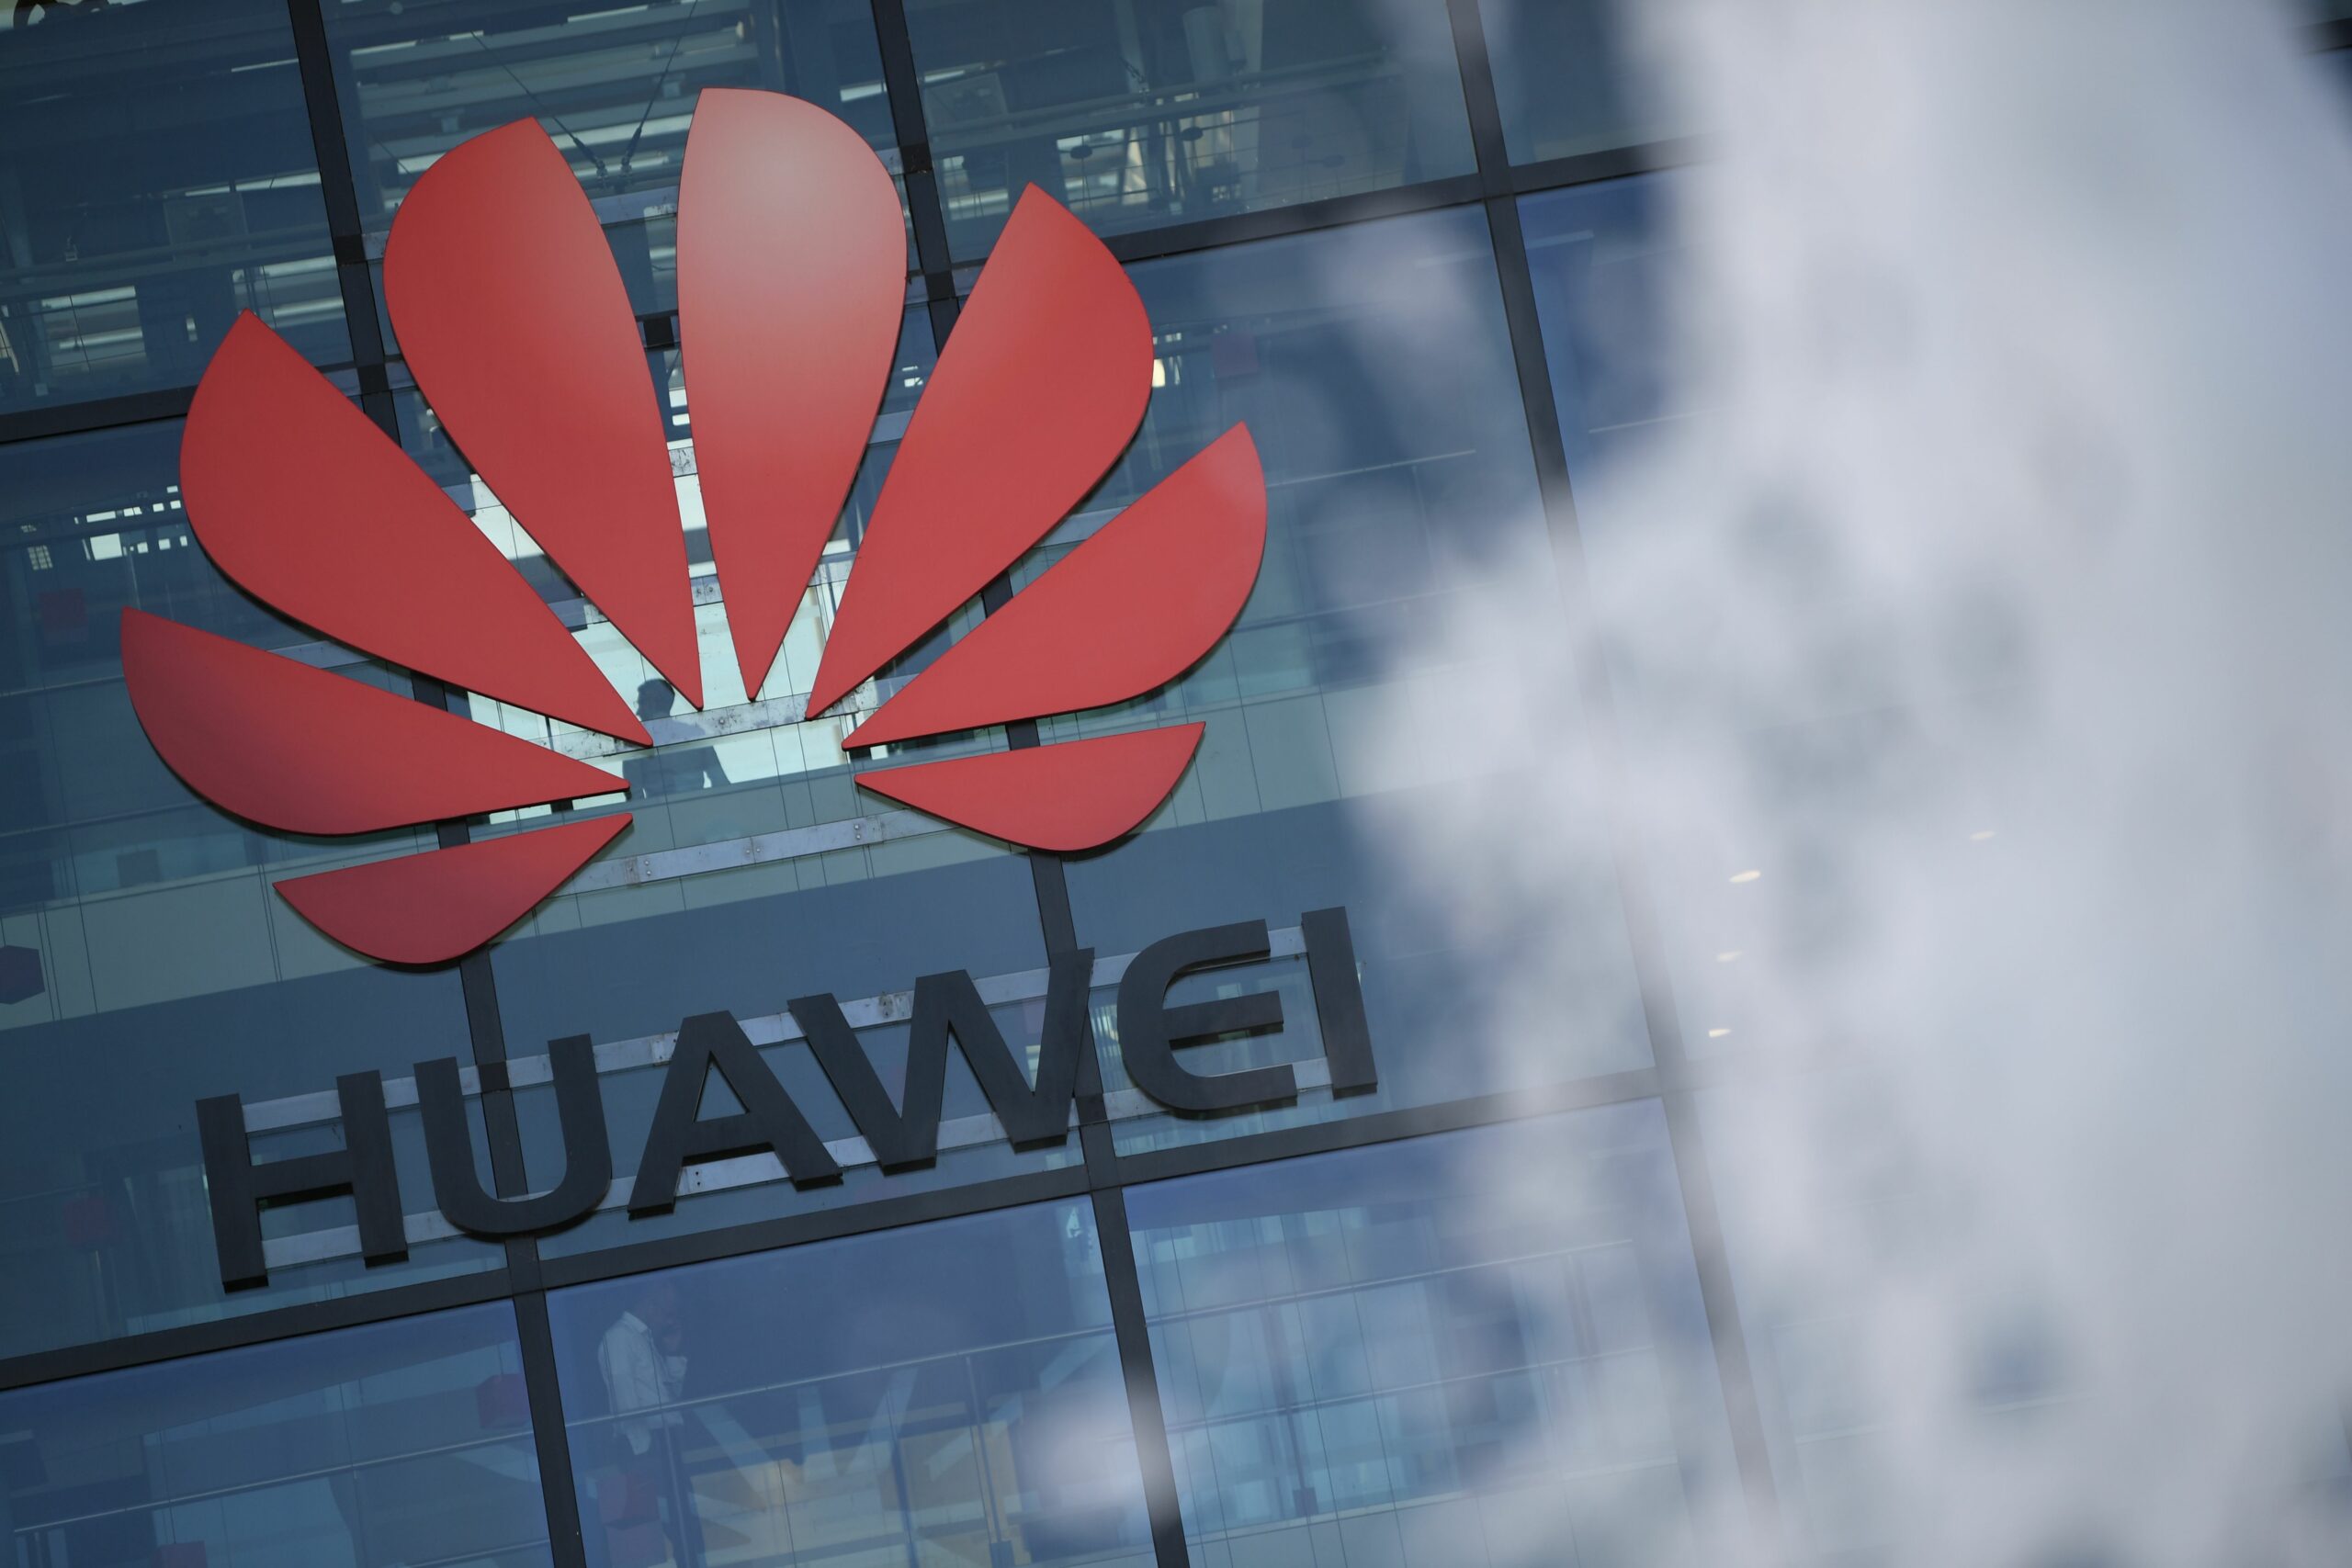 Huawei overtakes Samsung to be No. 1 smartphone maker many thanks to China